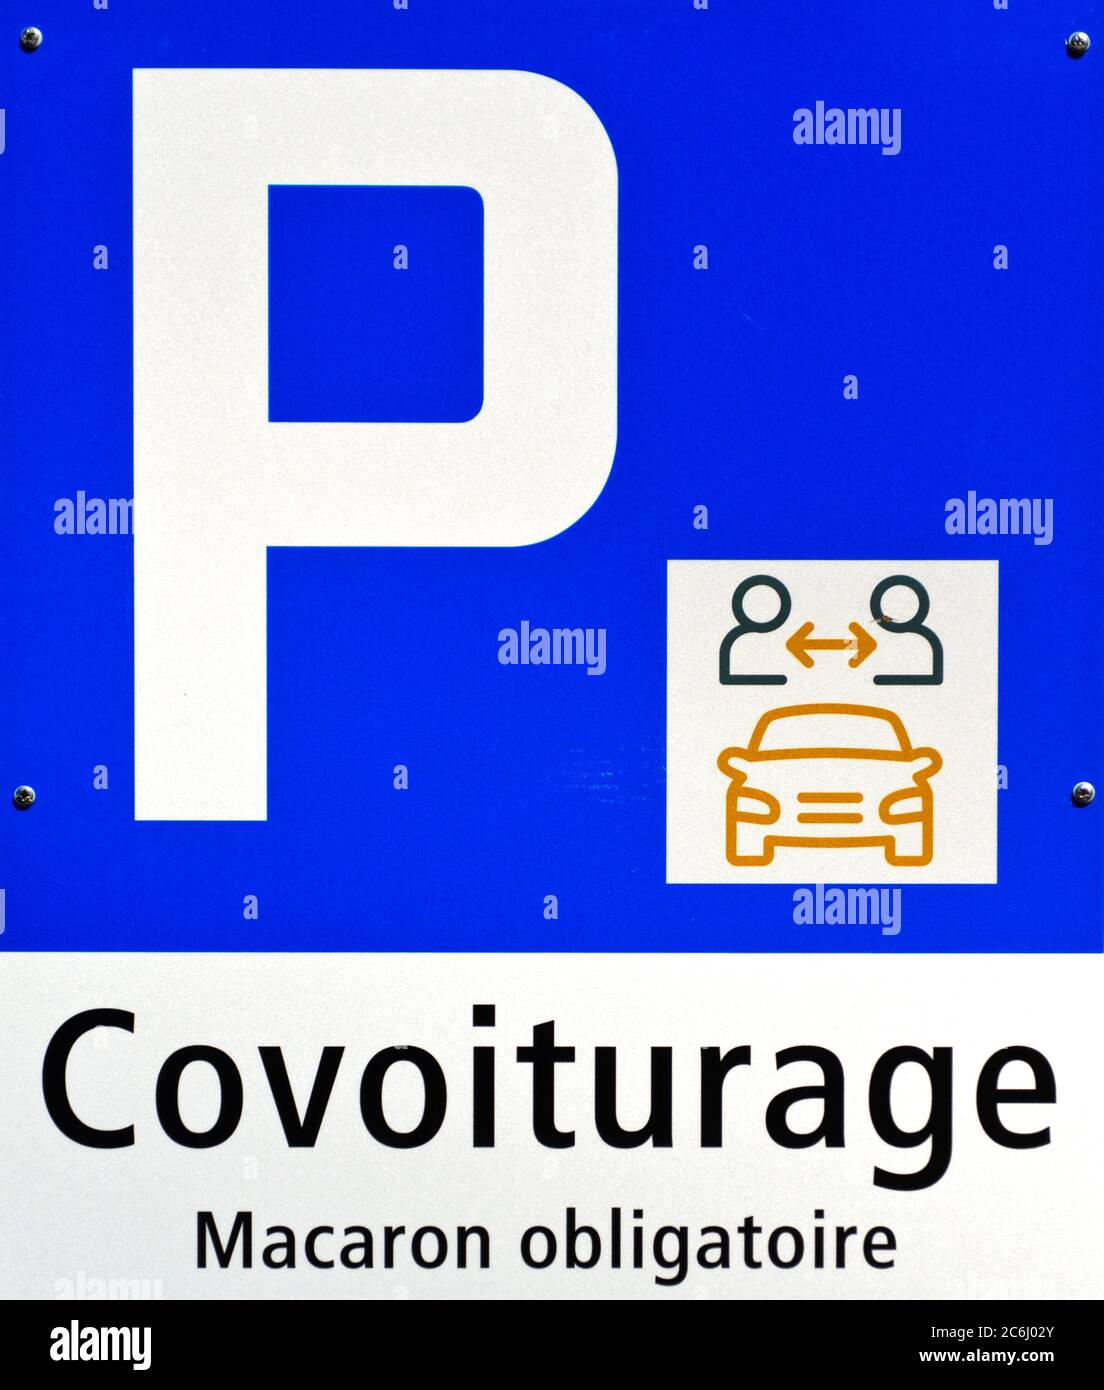 Traffic sign in French for car park for carpooling (covoiturage = car-sharing), Le Brassus, Vallée de Joux, Vaud, Switzerlandd Stock Photo